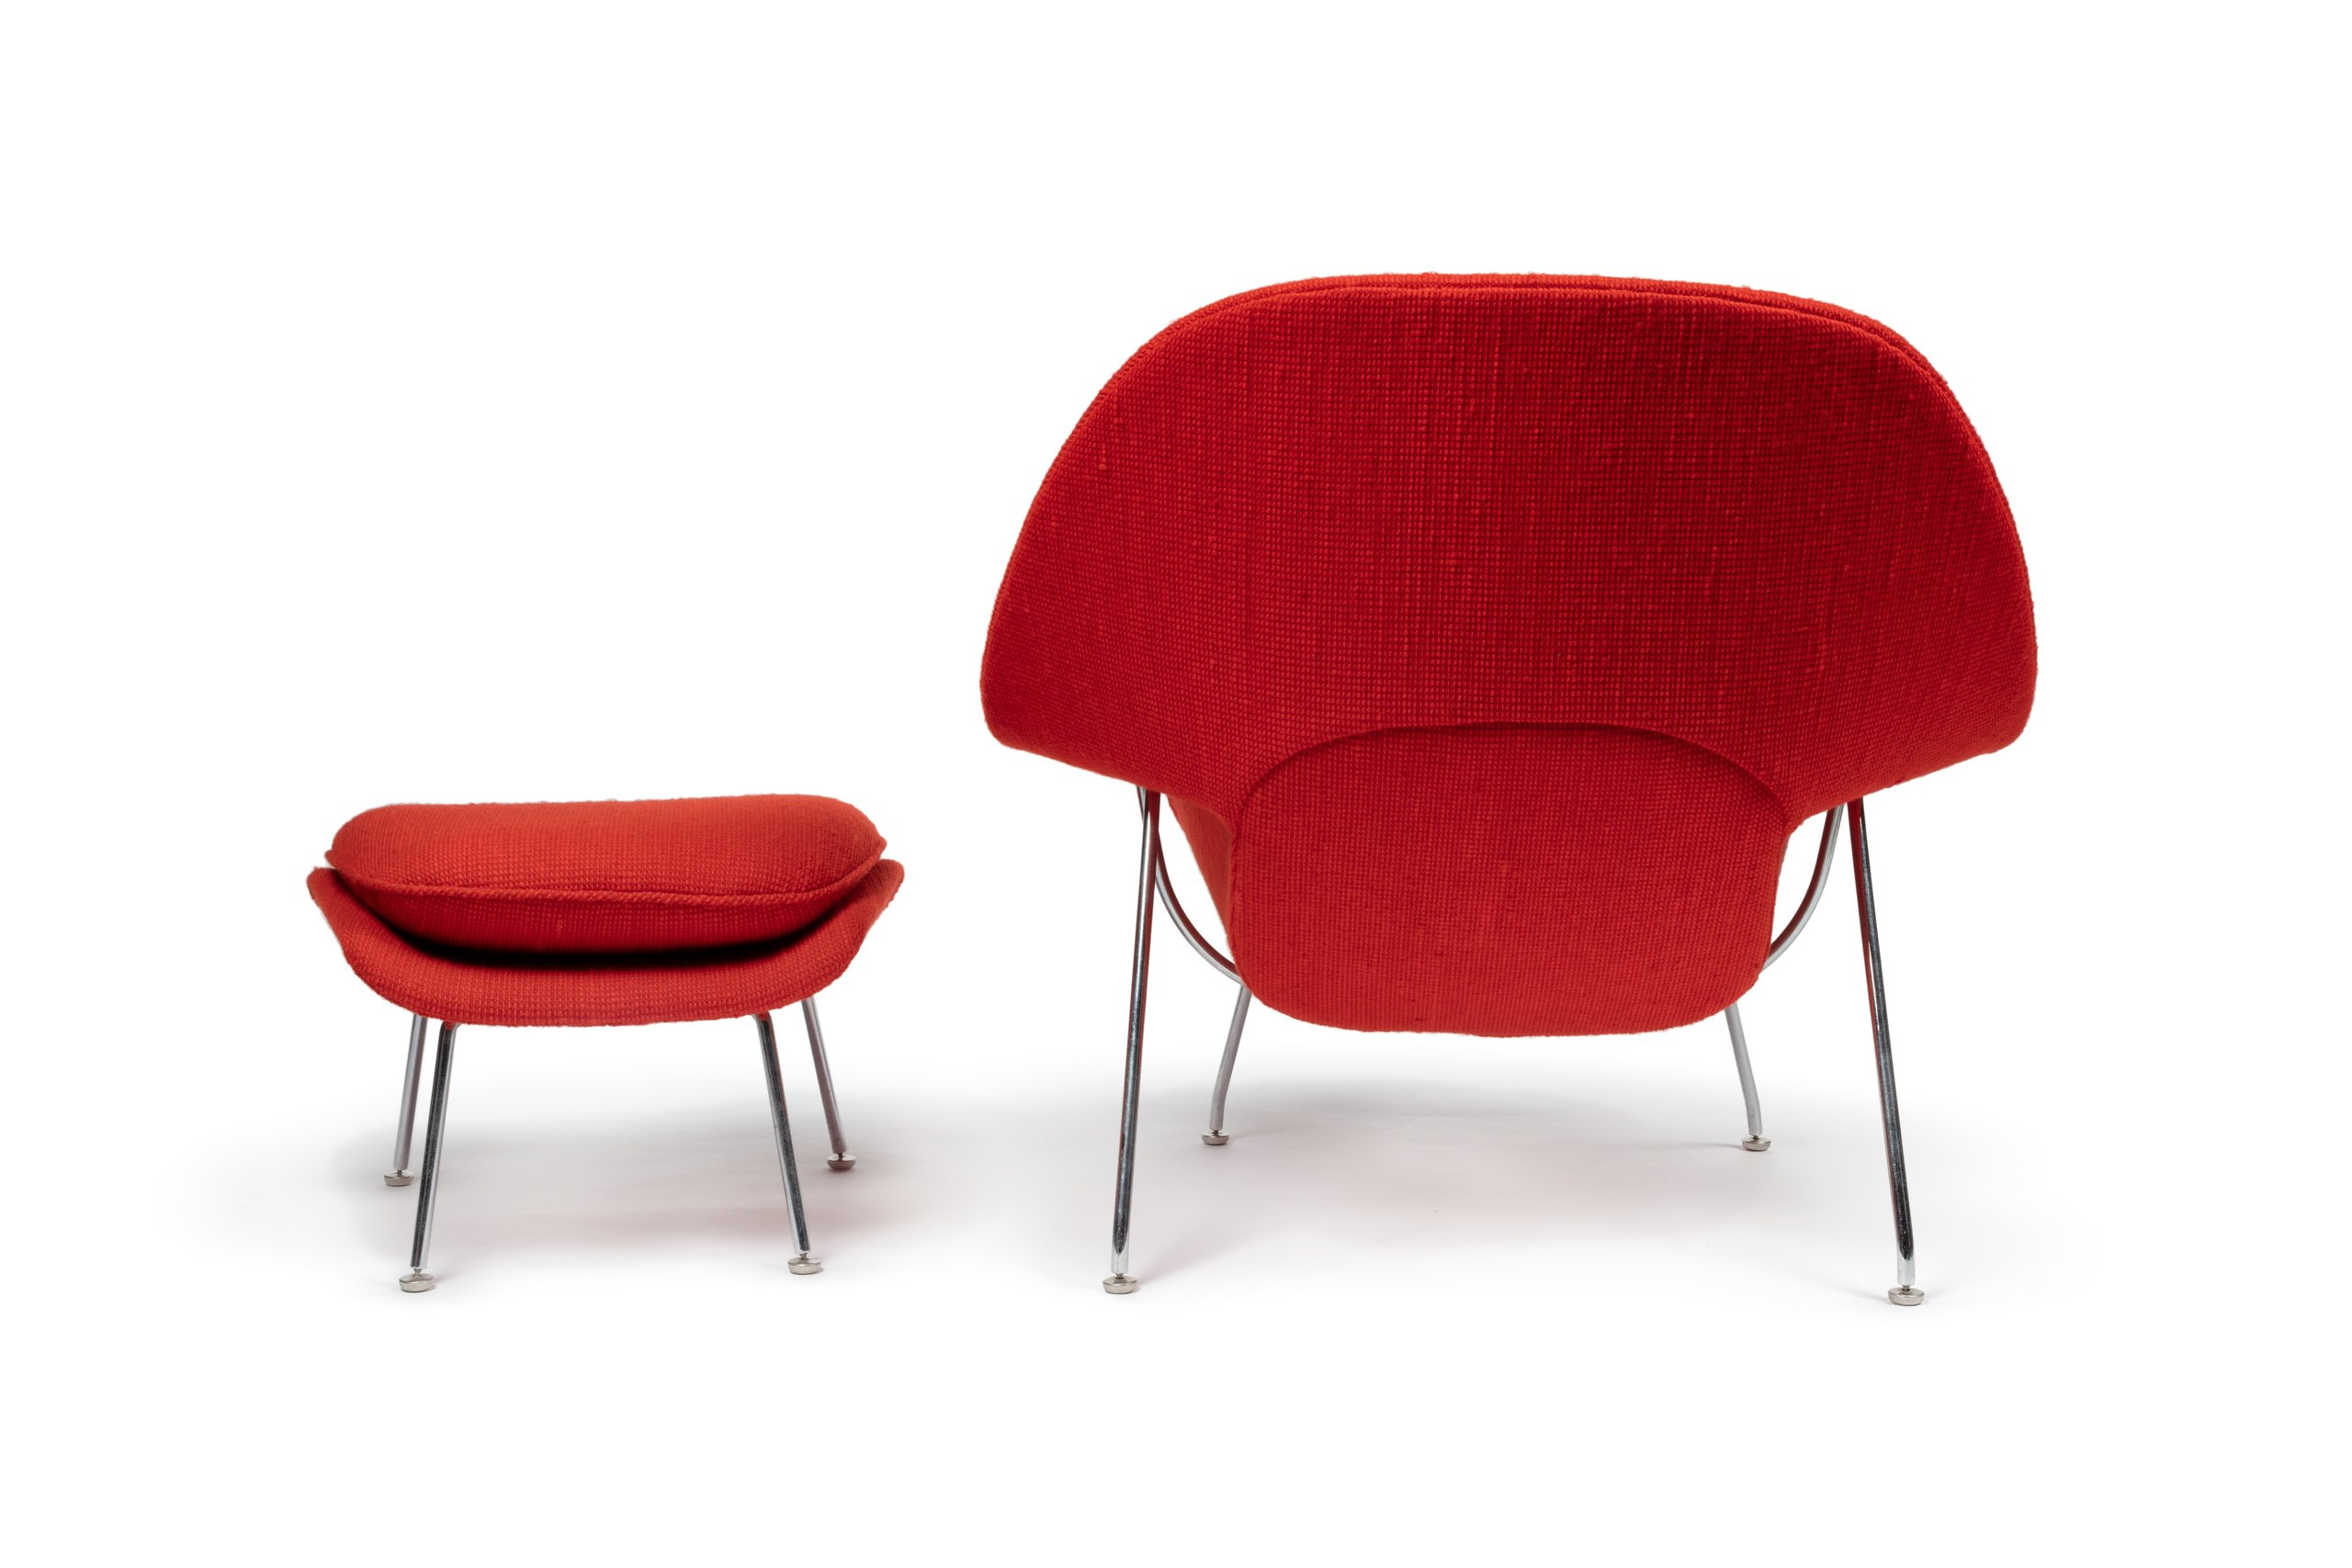 Armchair and footstool designed by Earo Saarinen for M Knoll International